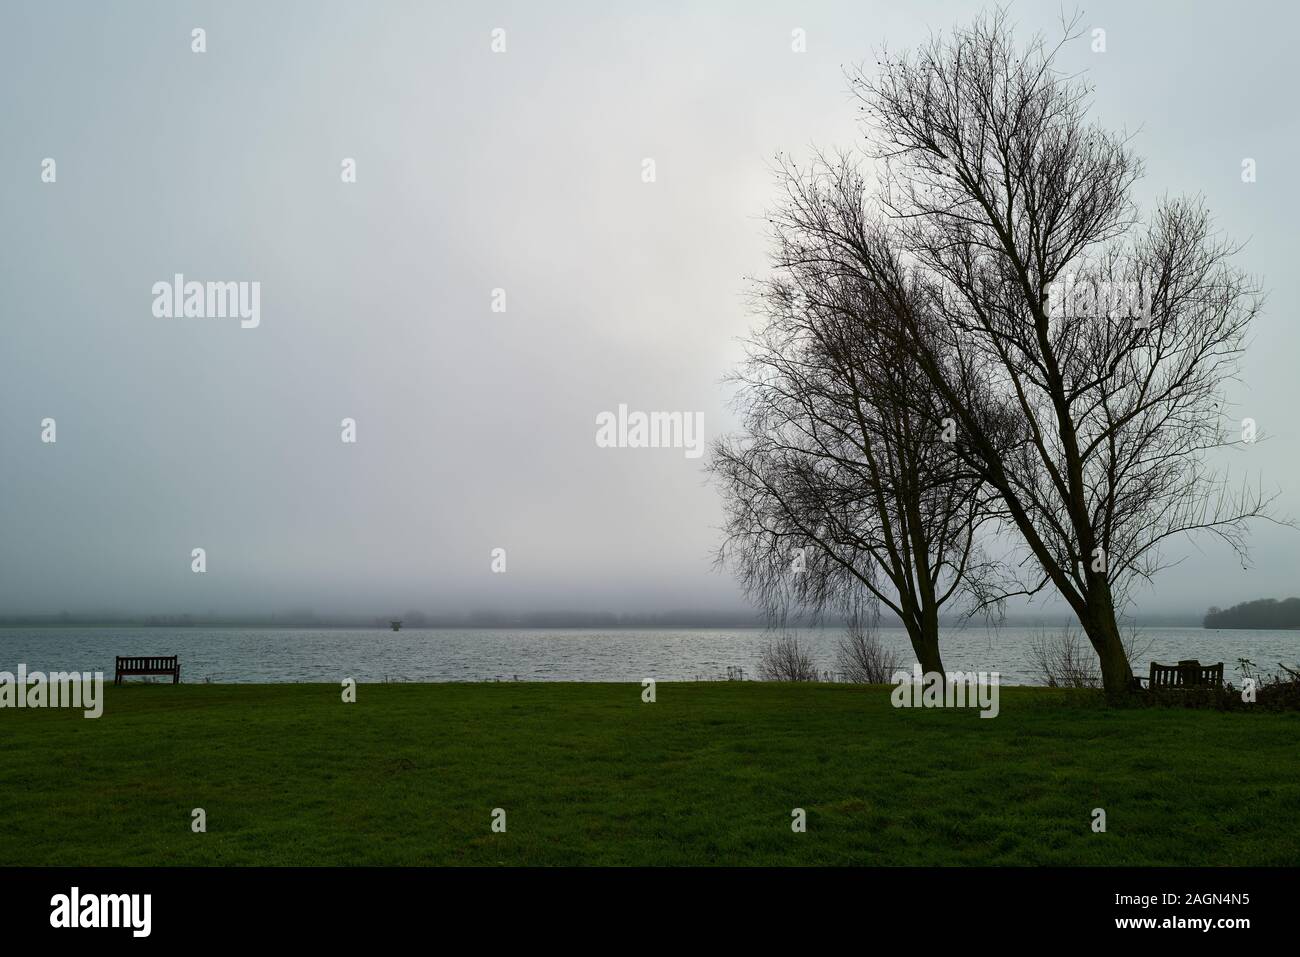 Sunlight starts to break through the mist over a lake on a foggy winter morning. Stock Photo